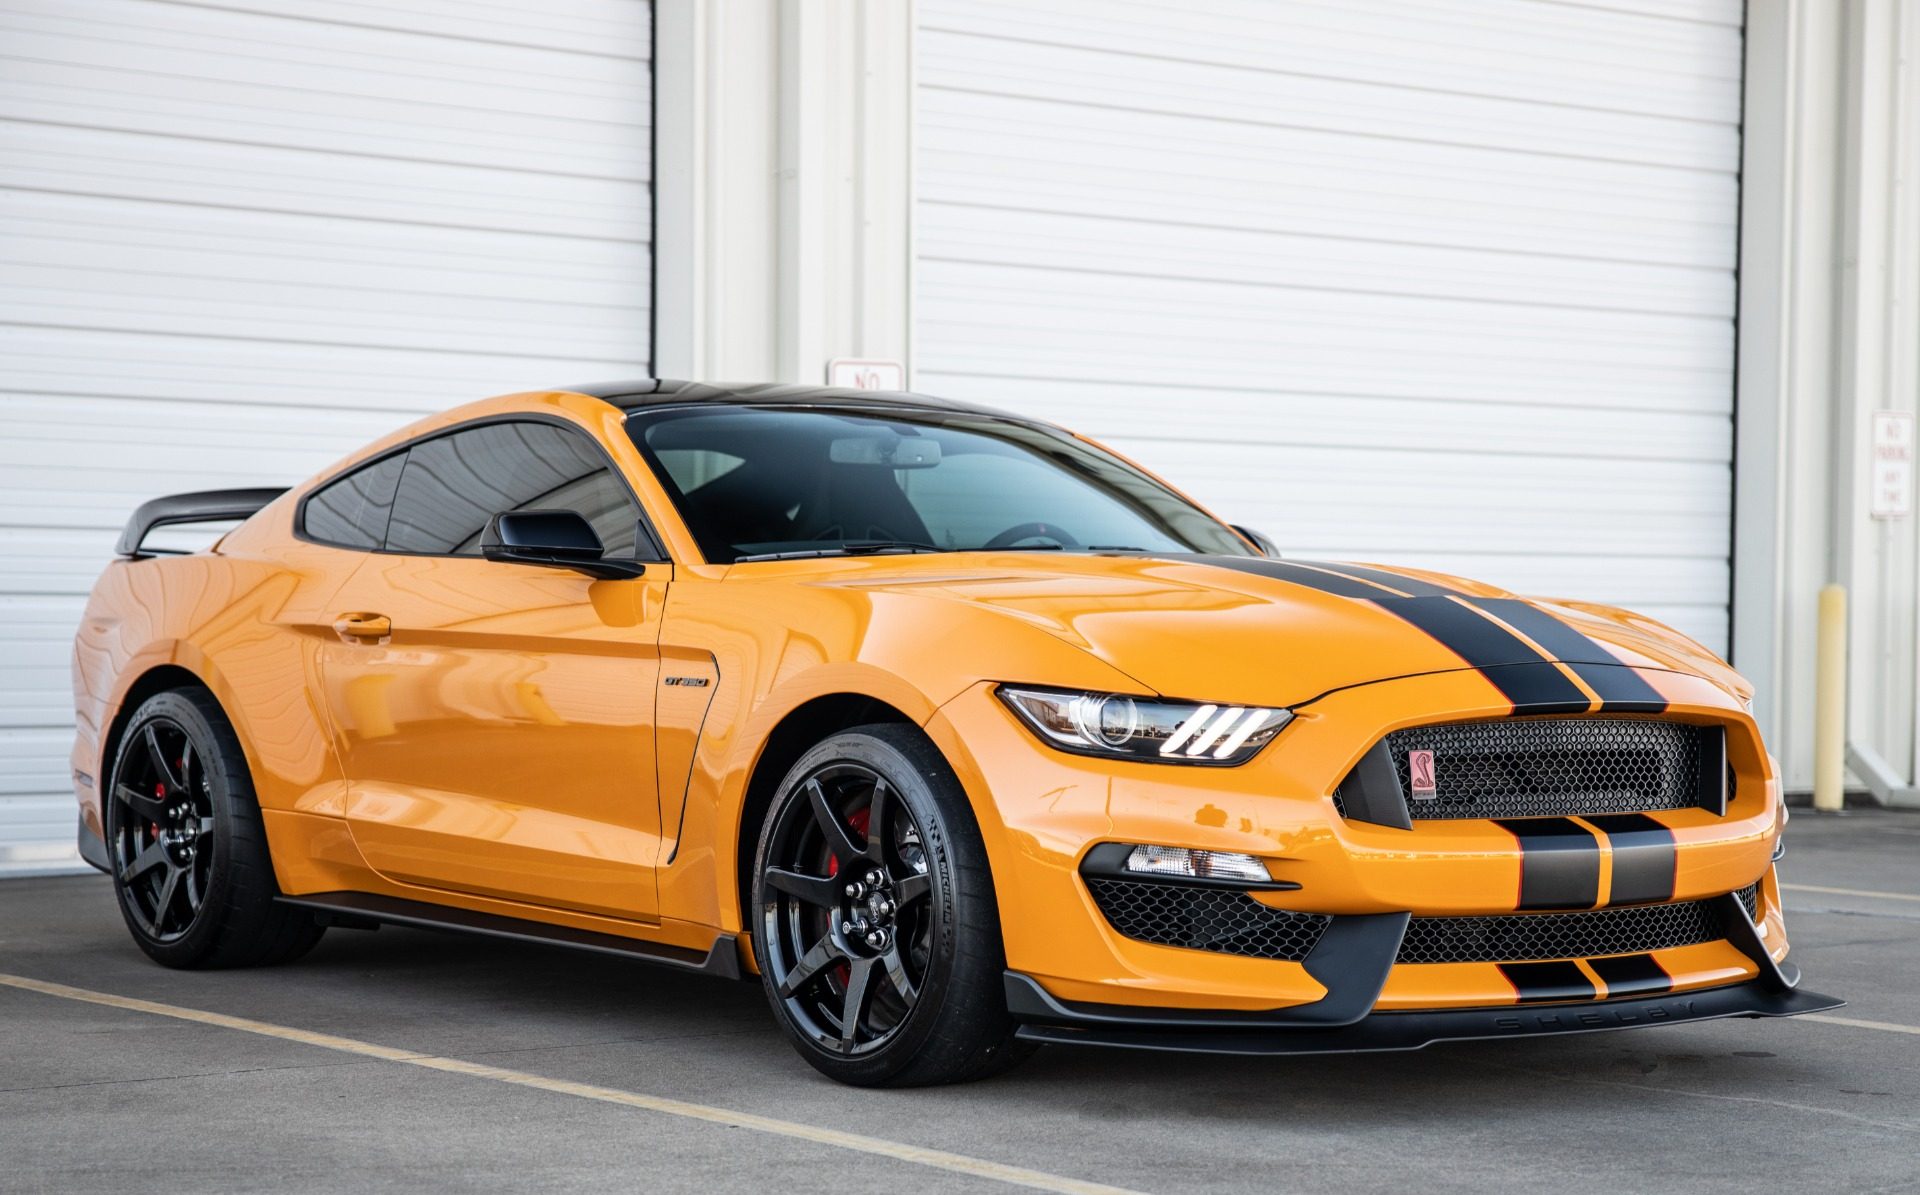 Mustang Of The Day: 2019 Ford Mustang Shelby GT350R